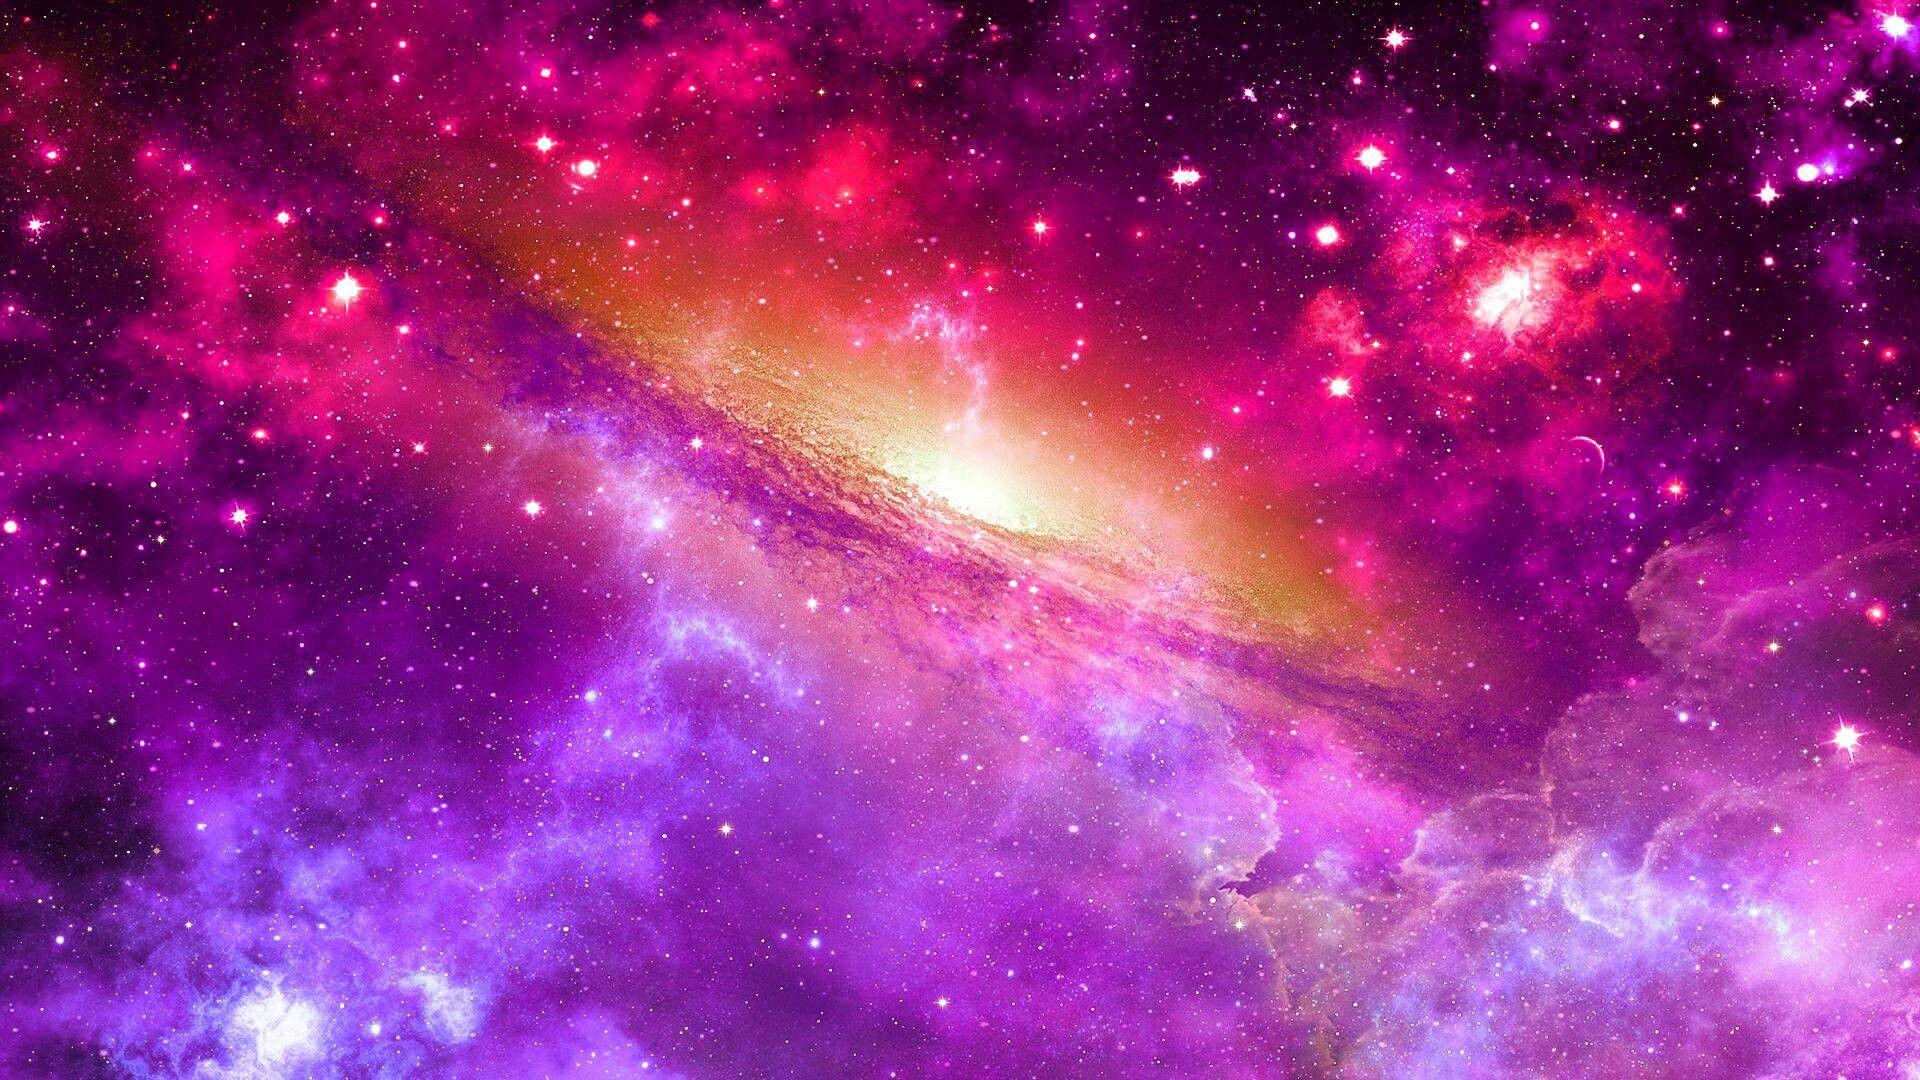 Beautiful Colored Space Nebula iPhone 6 Plus HD Wallpaper | Halloween wallpaper  backgrounds, Space phone wallpaper, Iphone 6 wallpaper backgrounds